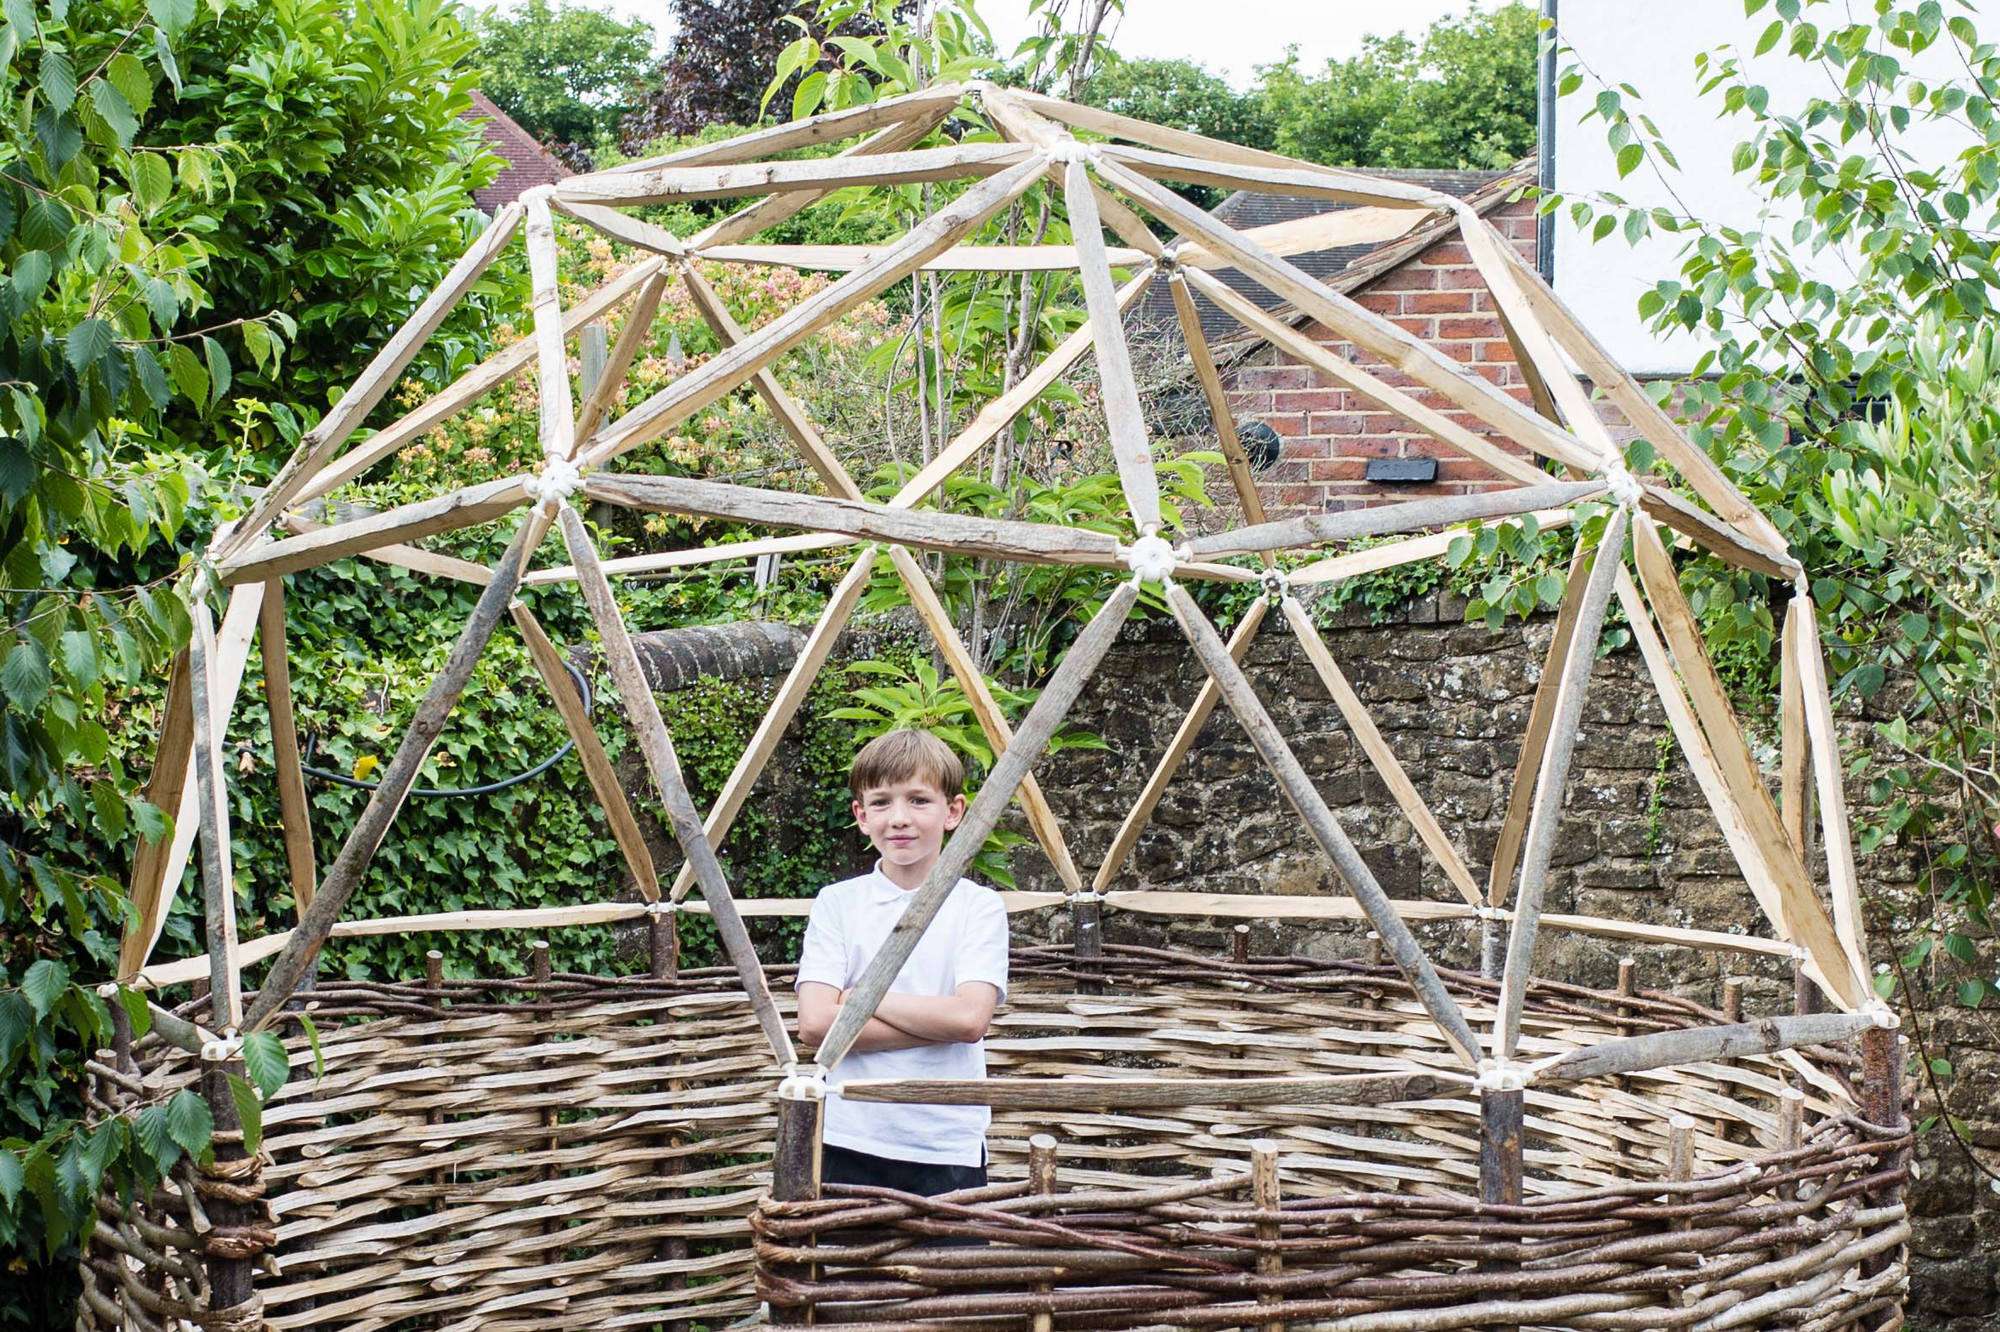 2v geodesic dome kit creates an outdoor structure